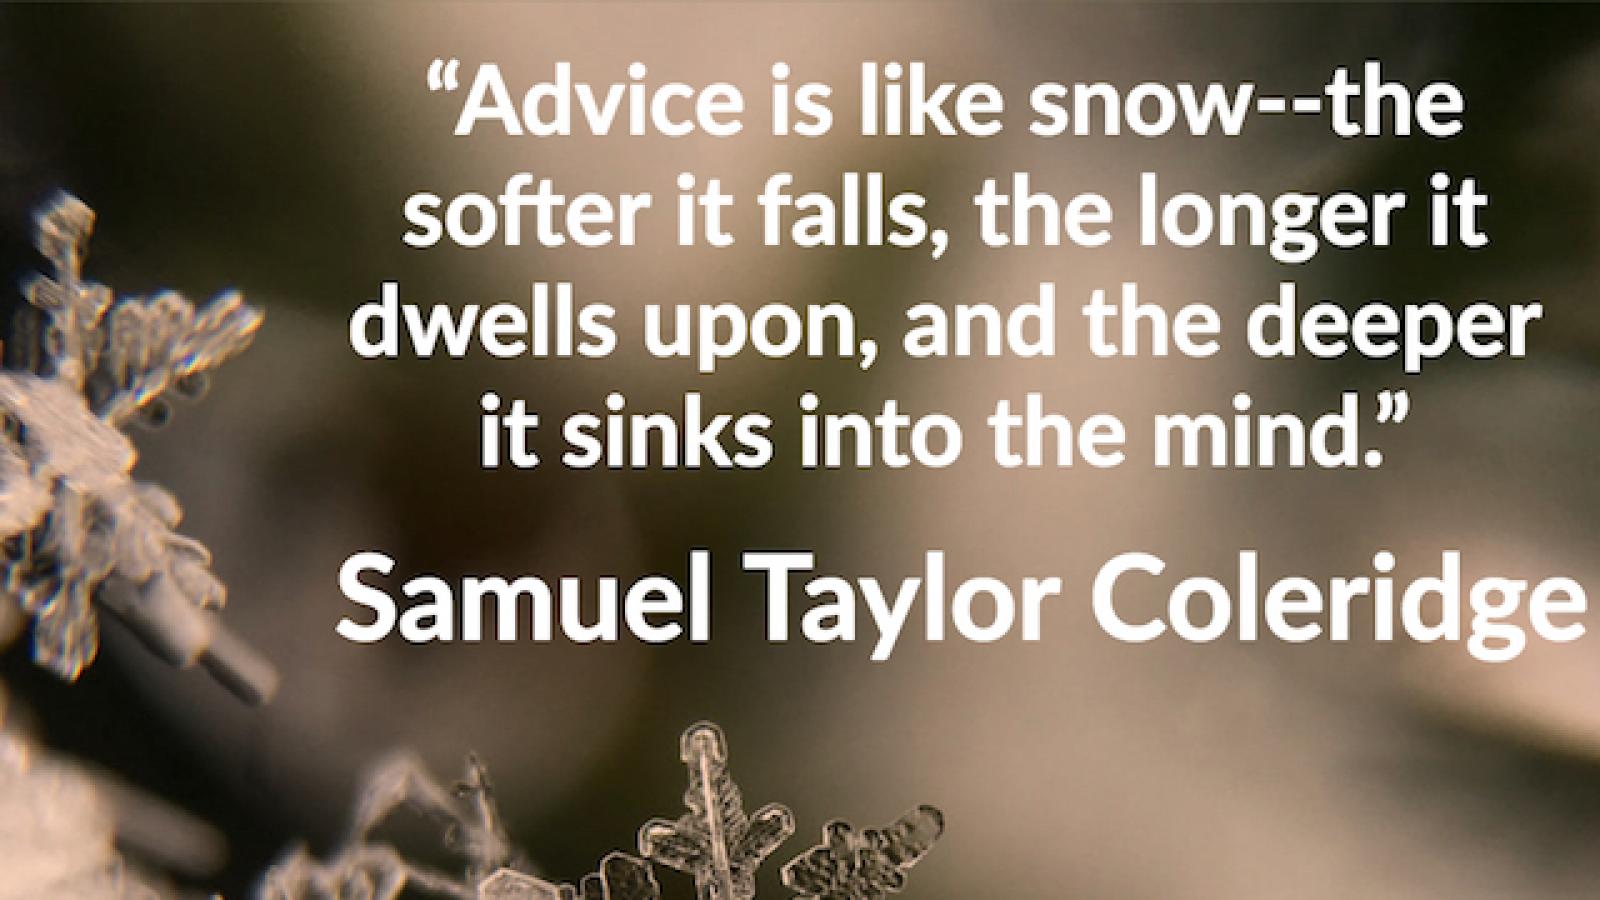 quote by Samuel Taylor Coleridge with micro photo of snowflakes